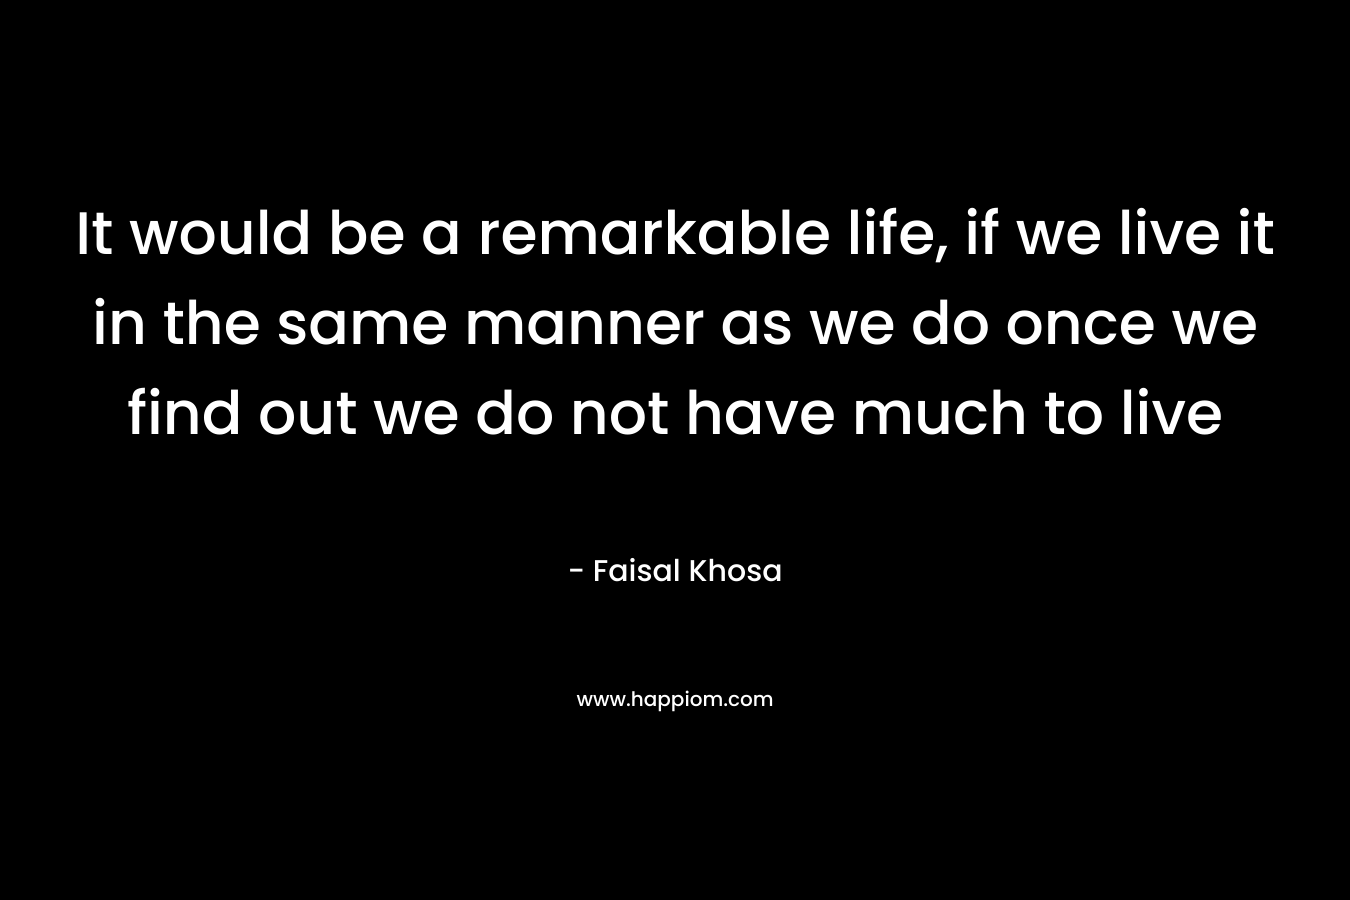 It would be a remarkable life, if we live it in the same manner as we do once we find out we do not have much to live – Faisal Khosa